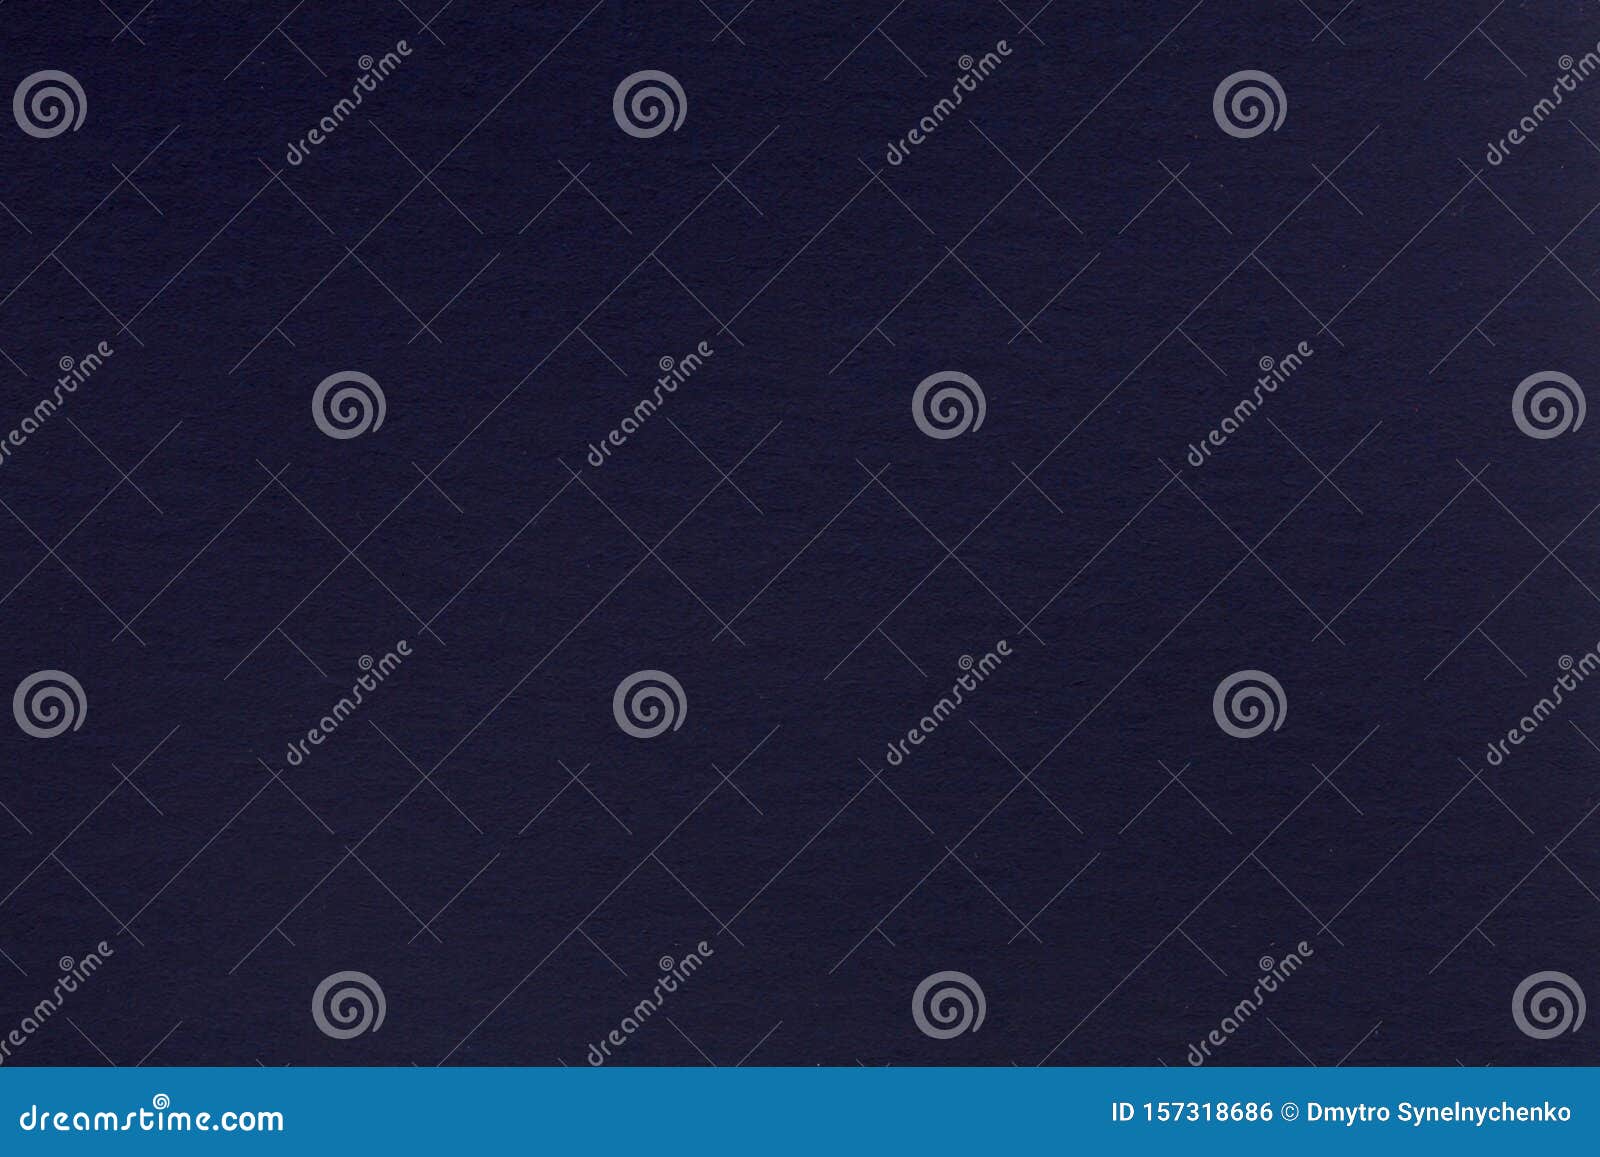 Dark Blue Paper With Delicate Grid To Use As Background Stock